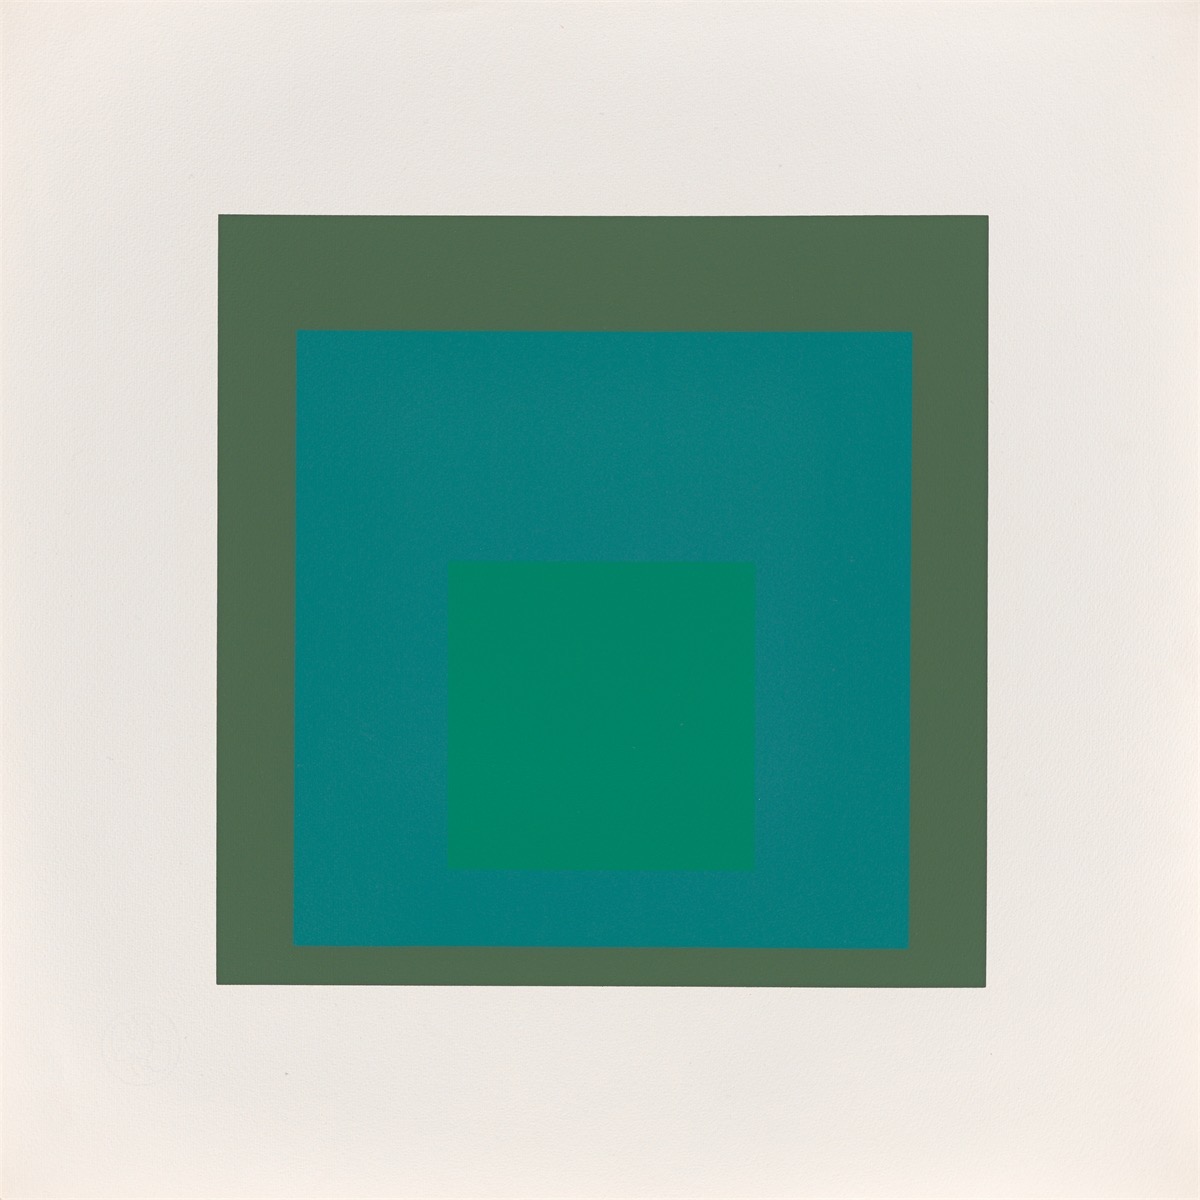 Josef Albers. ”Homage to the Square: Edition Keller I”. 1970 - Image 5 of 8